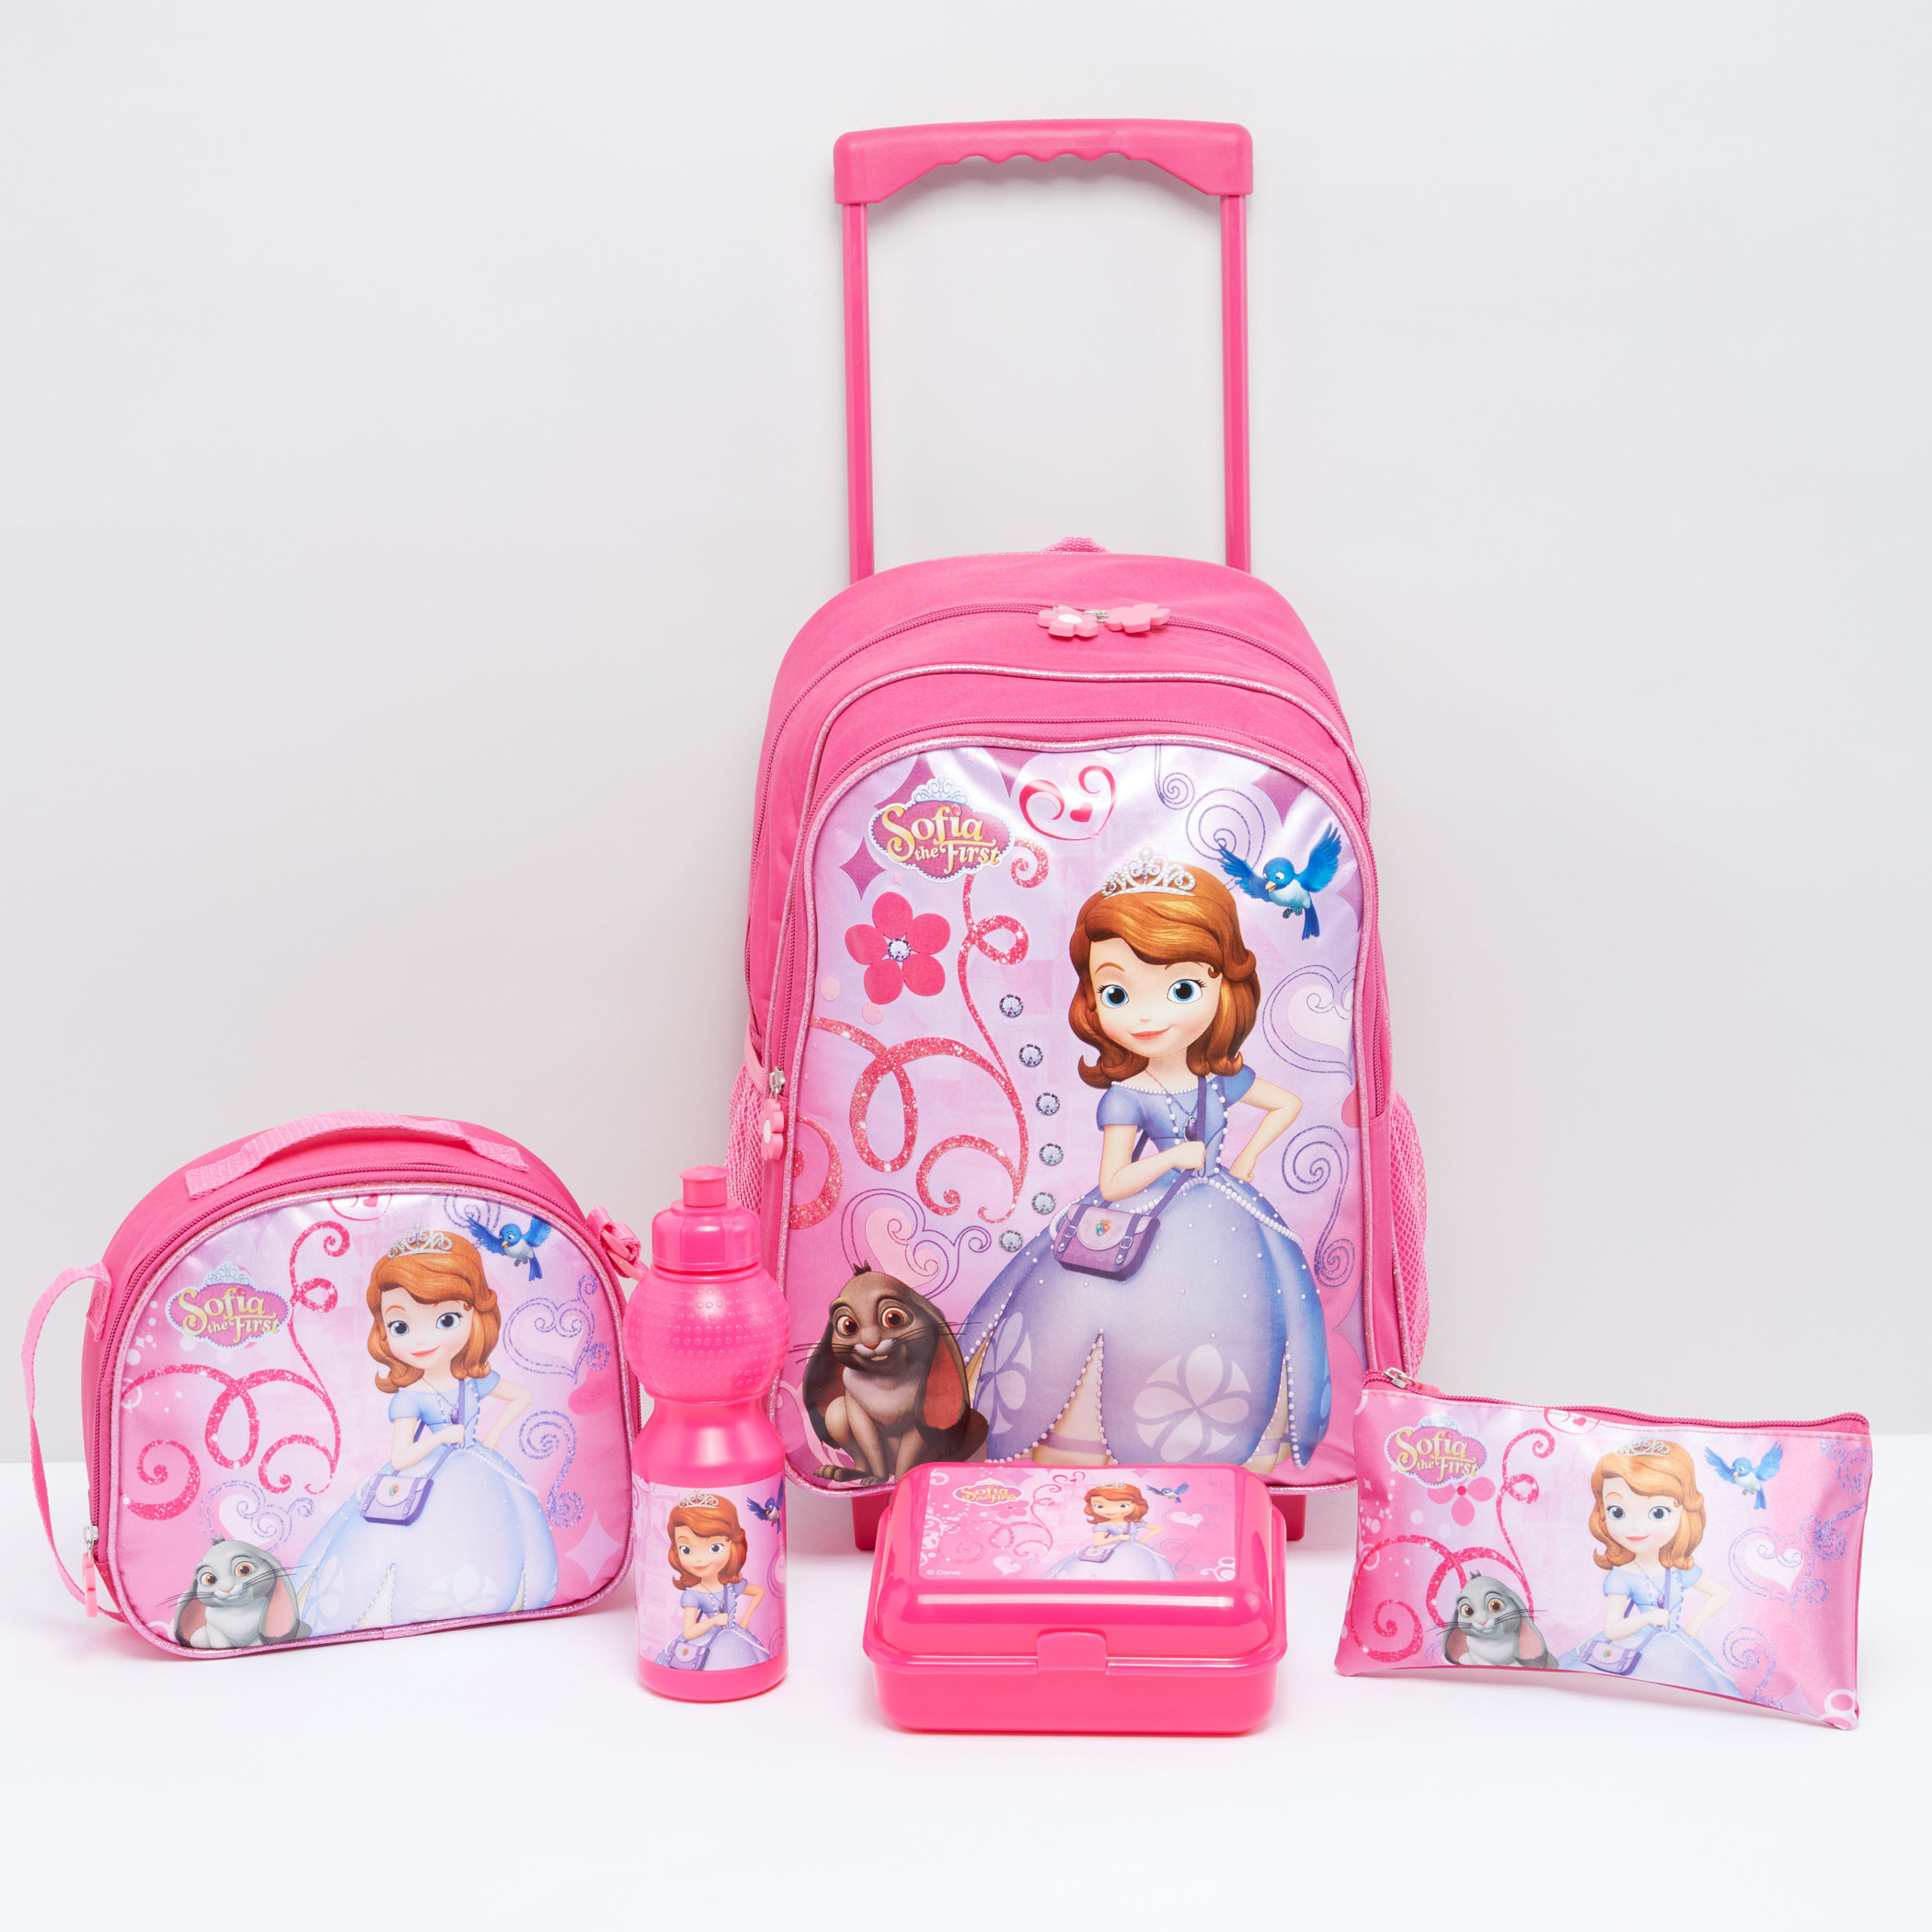 Shop Sofia the First Printed Backpack with Zip Closure Online | Max Qatar